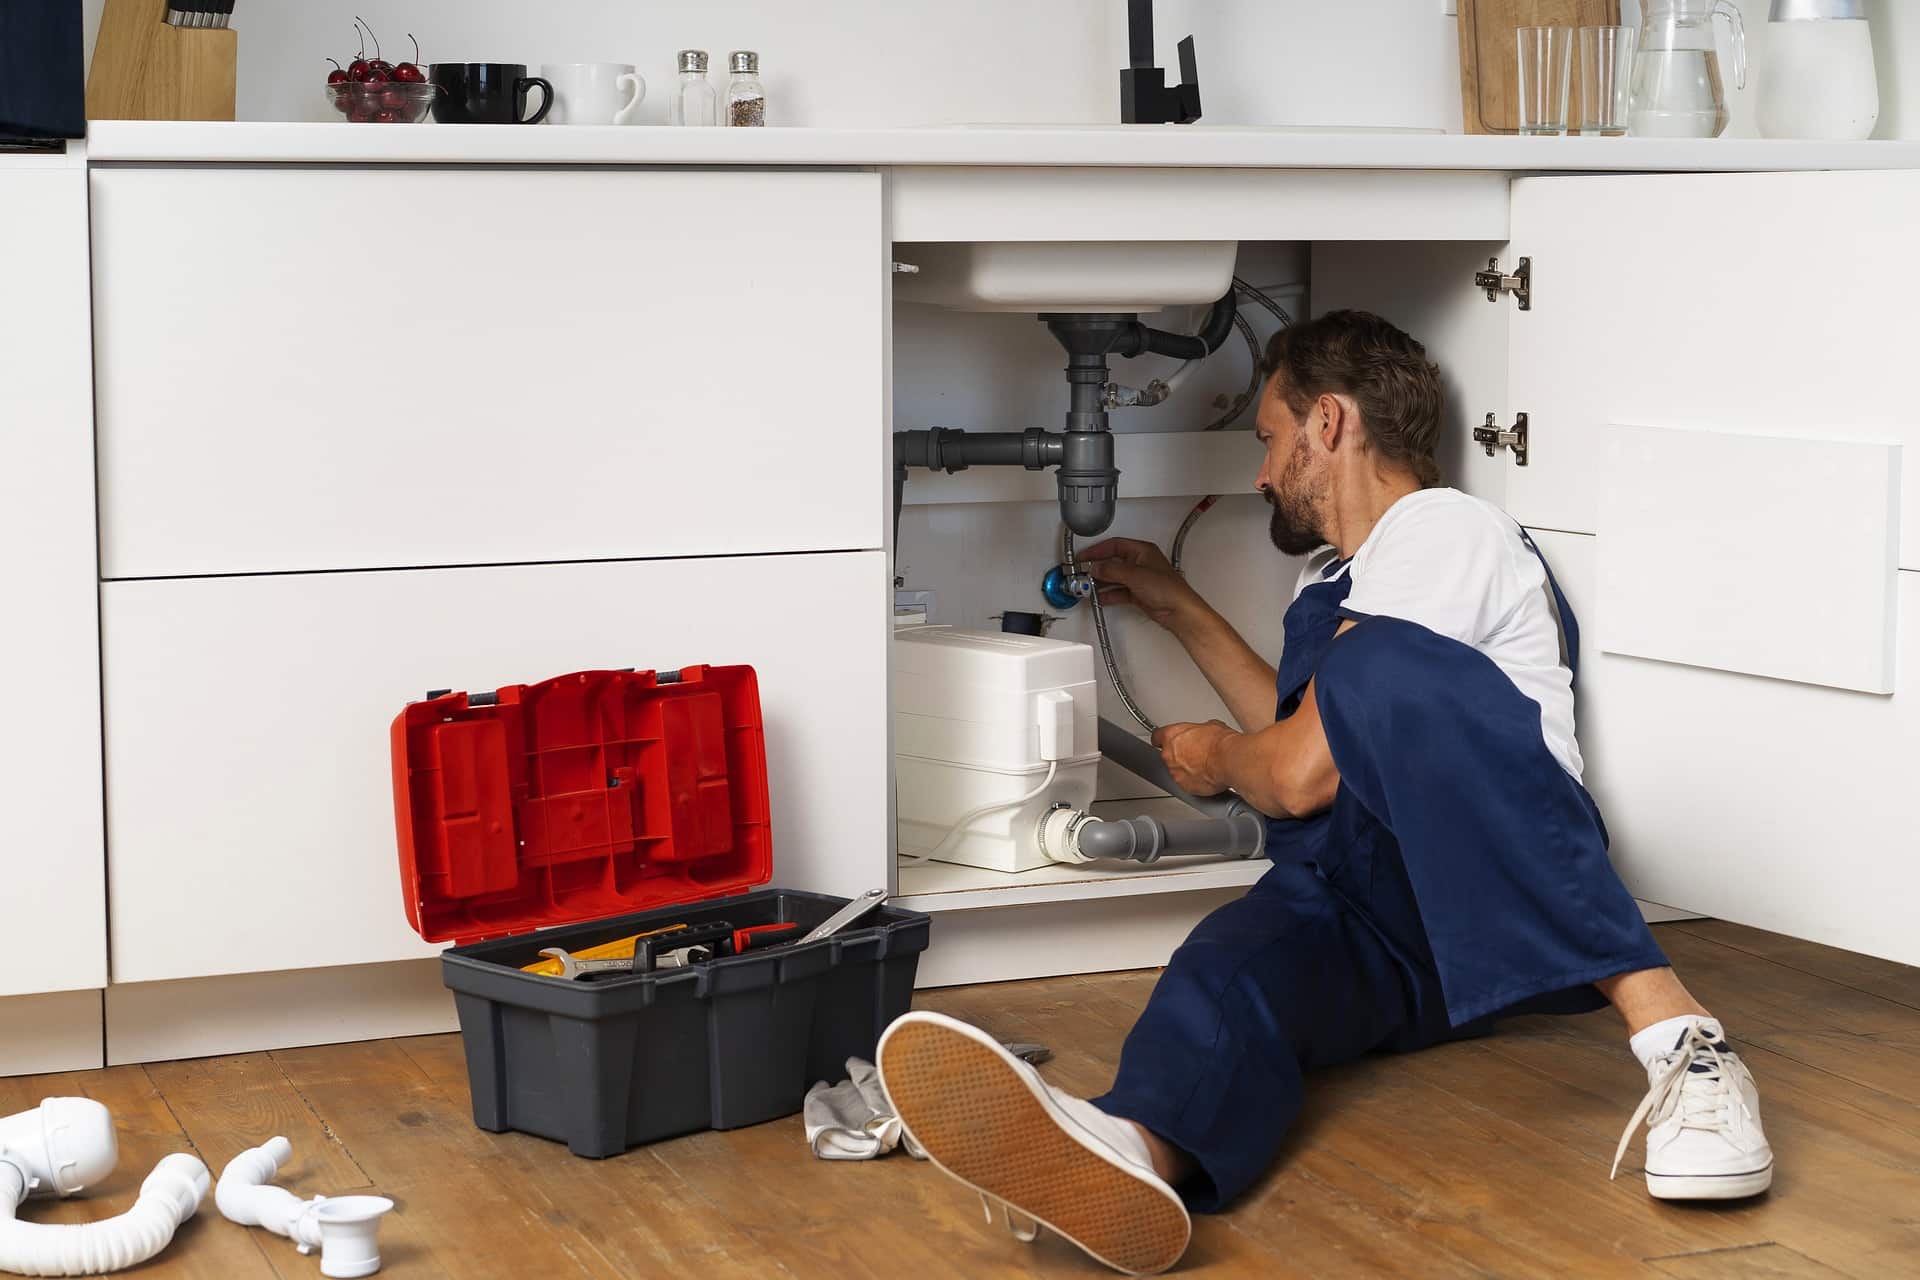 Plumbing Inspection for Home Purchase: What You Must Check